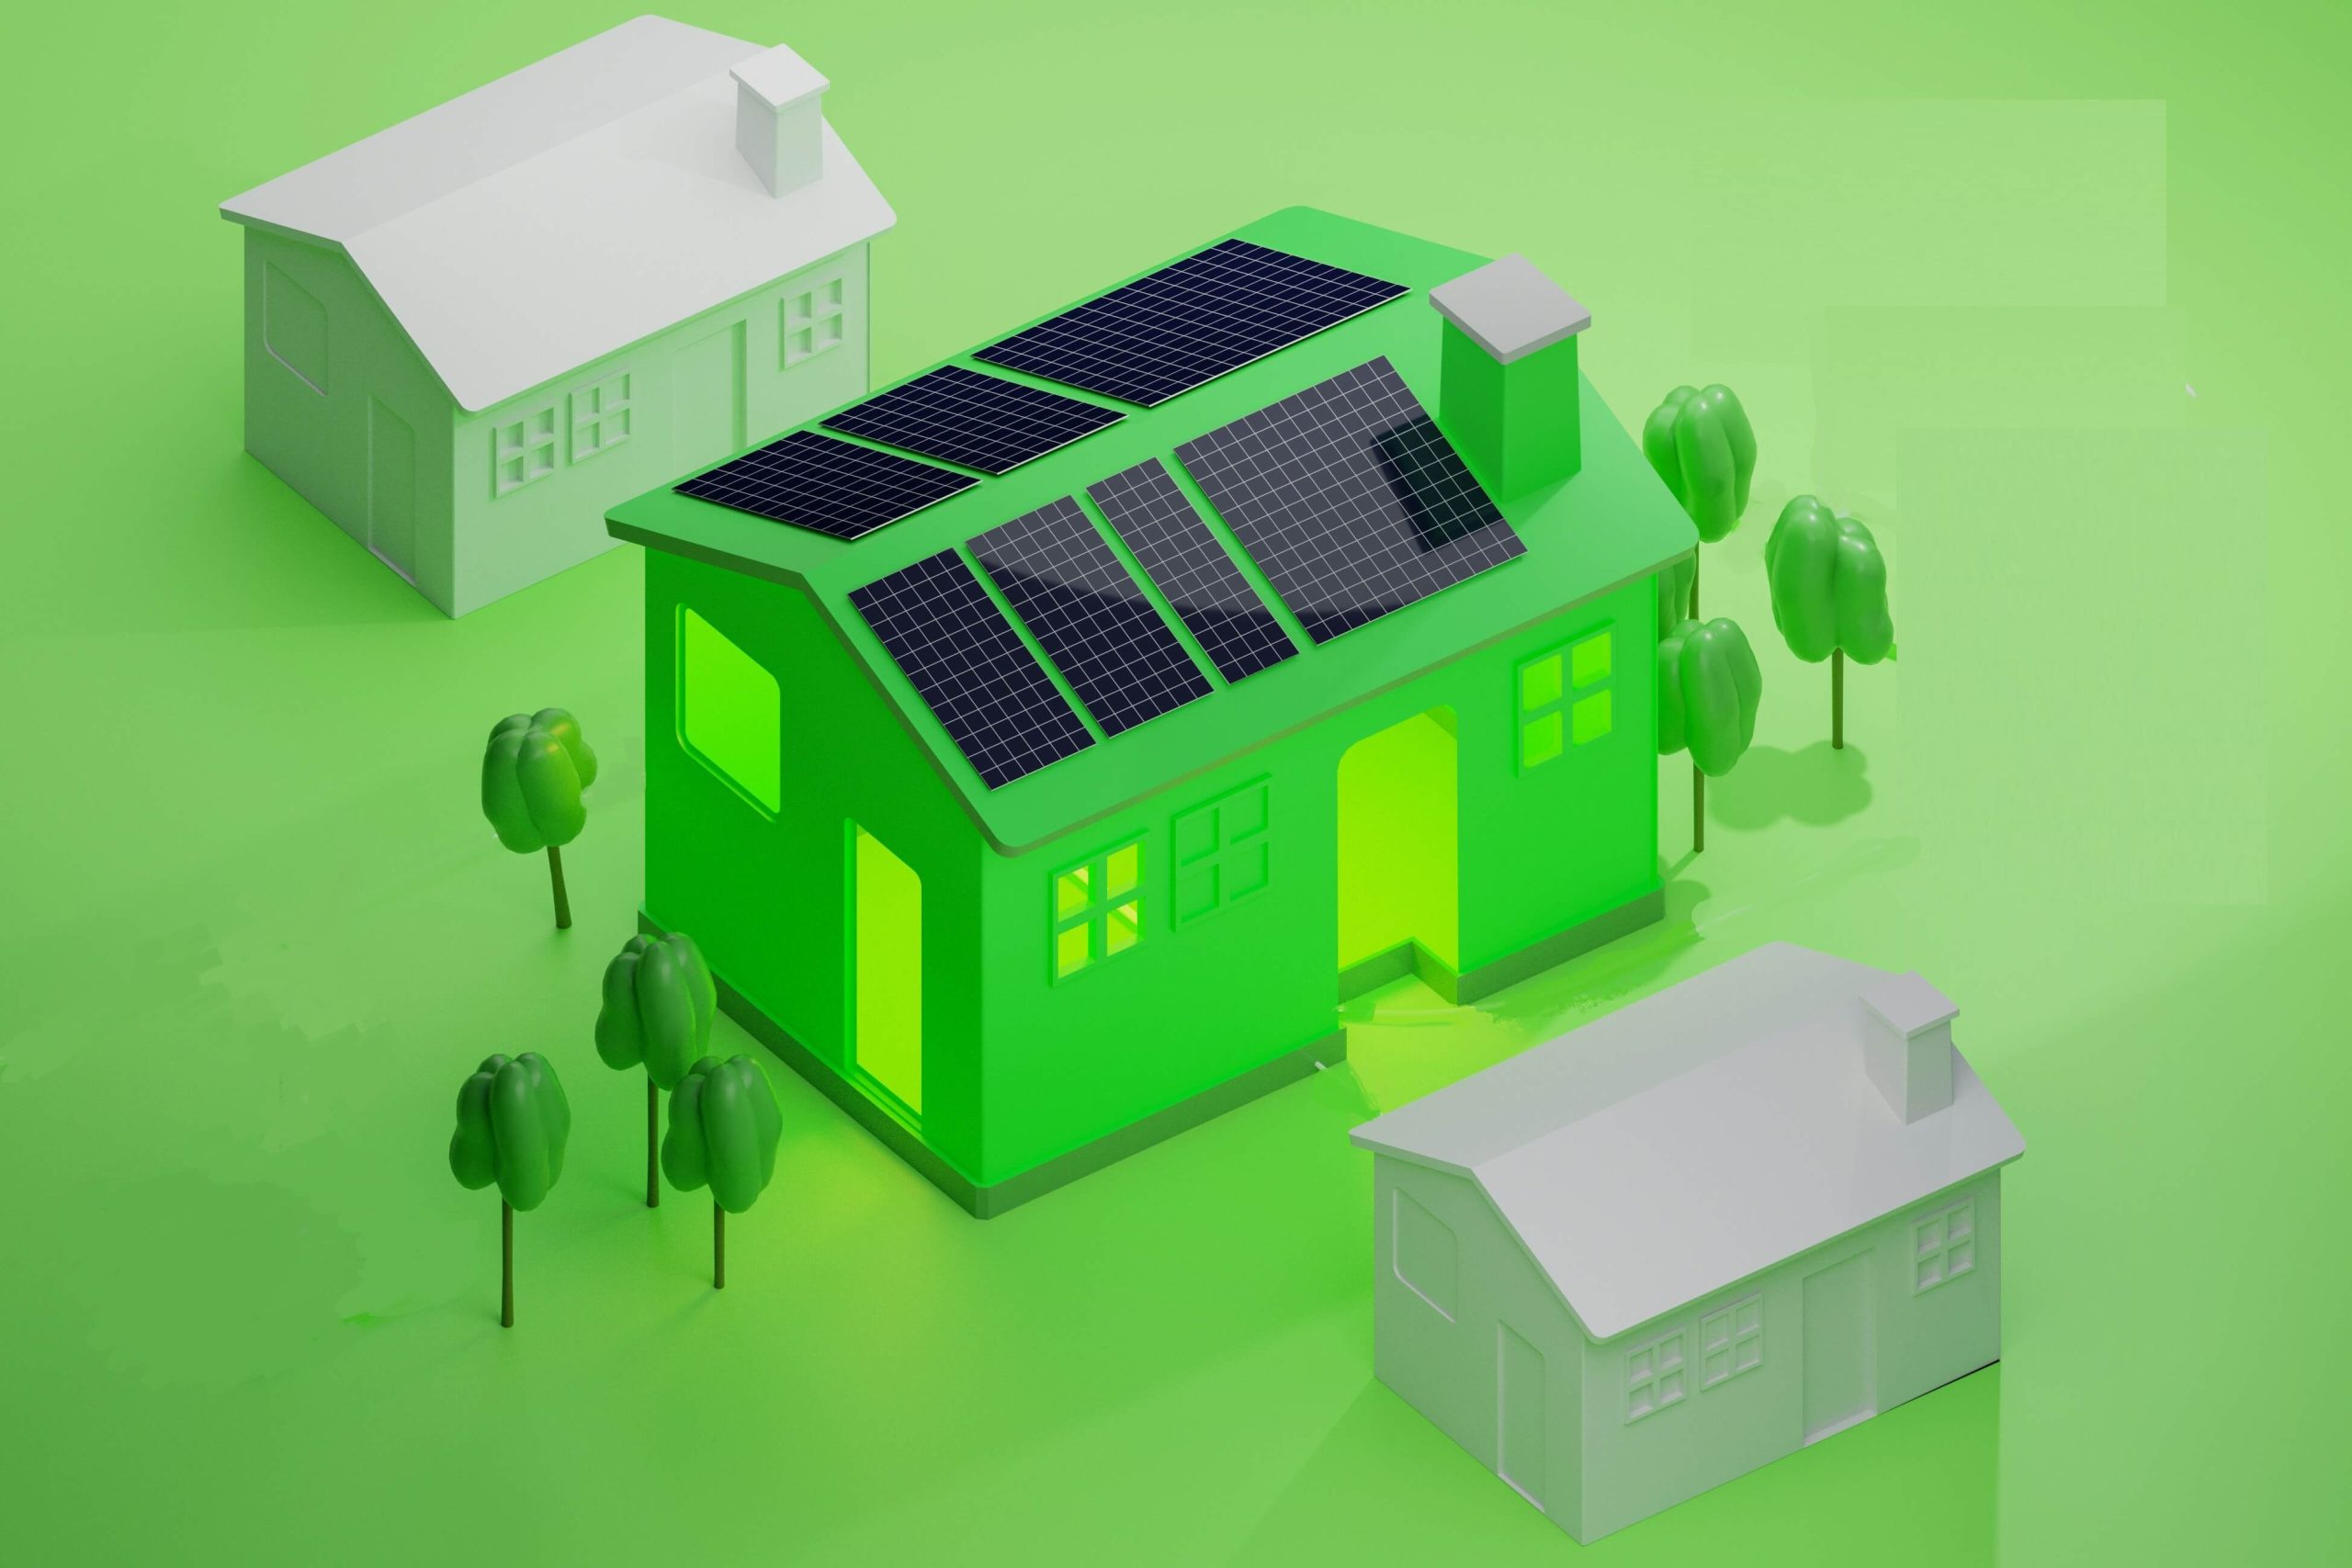 Australian government small scale energy scheme STC rebates for green home initiatives